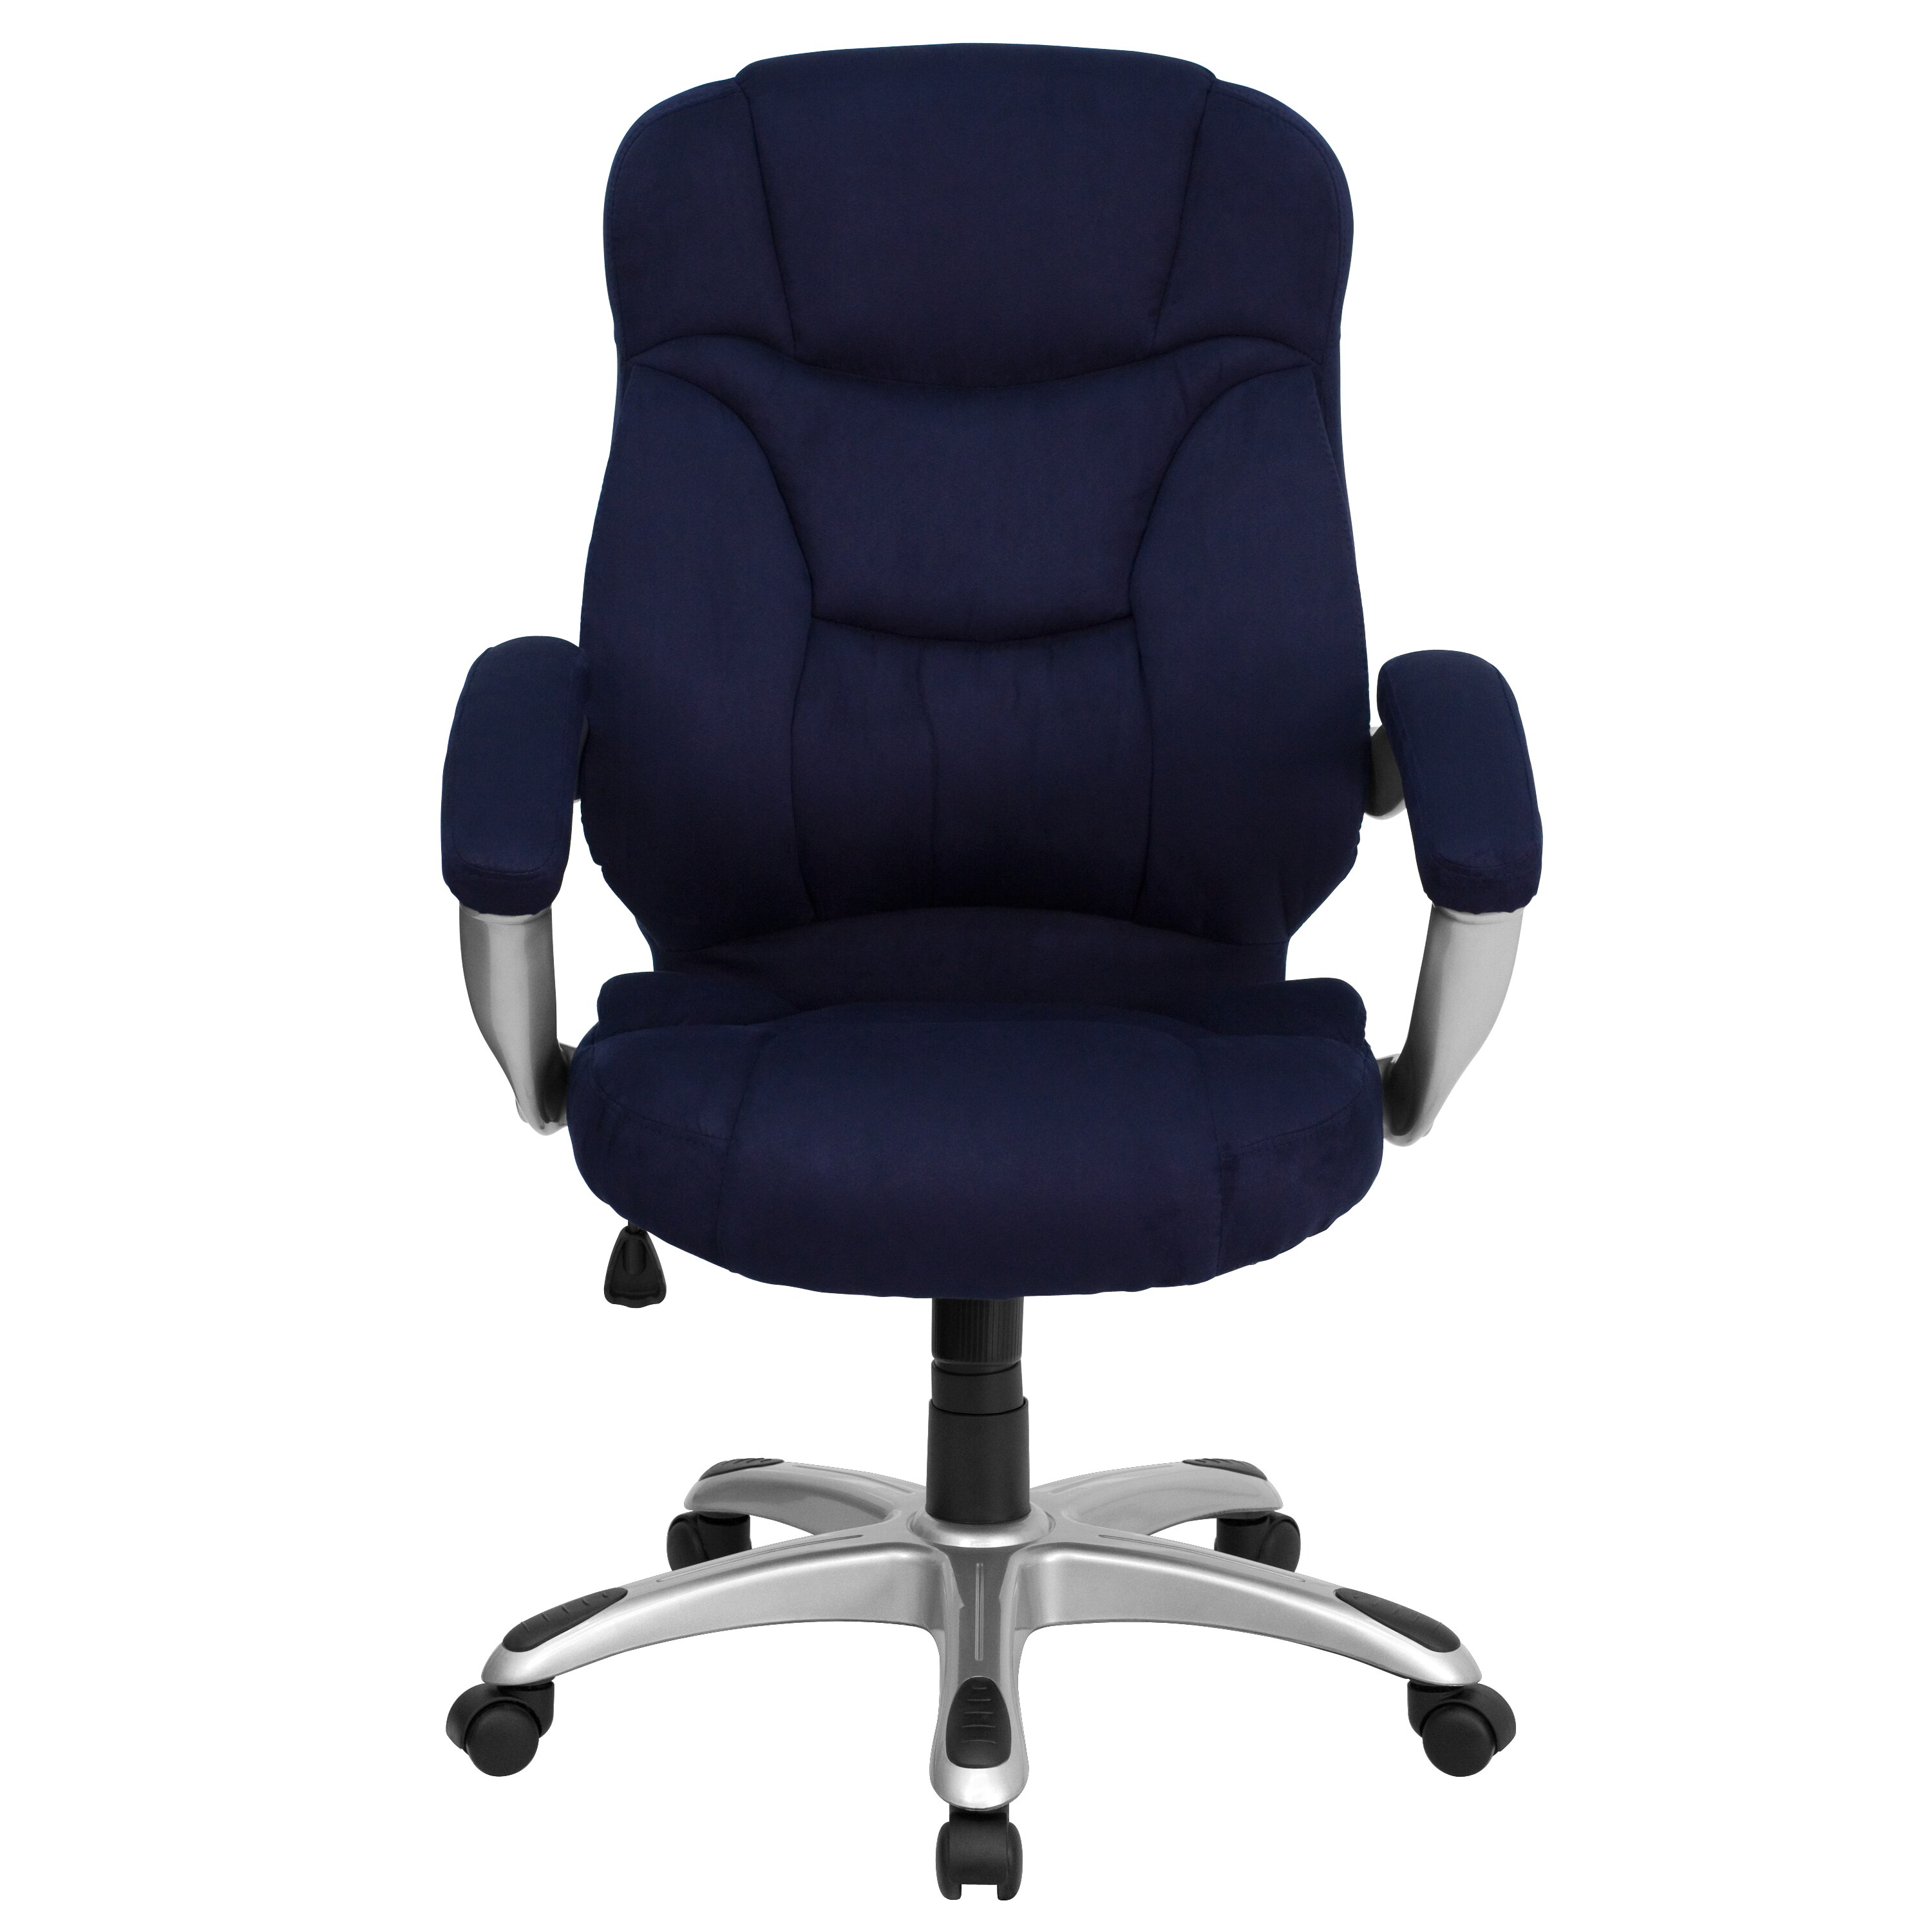 NAVY BLUE MICROFIBER FABRIC SLED BASE COMPUTER OFFICE DESK CHAIR 